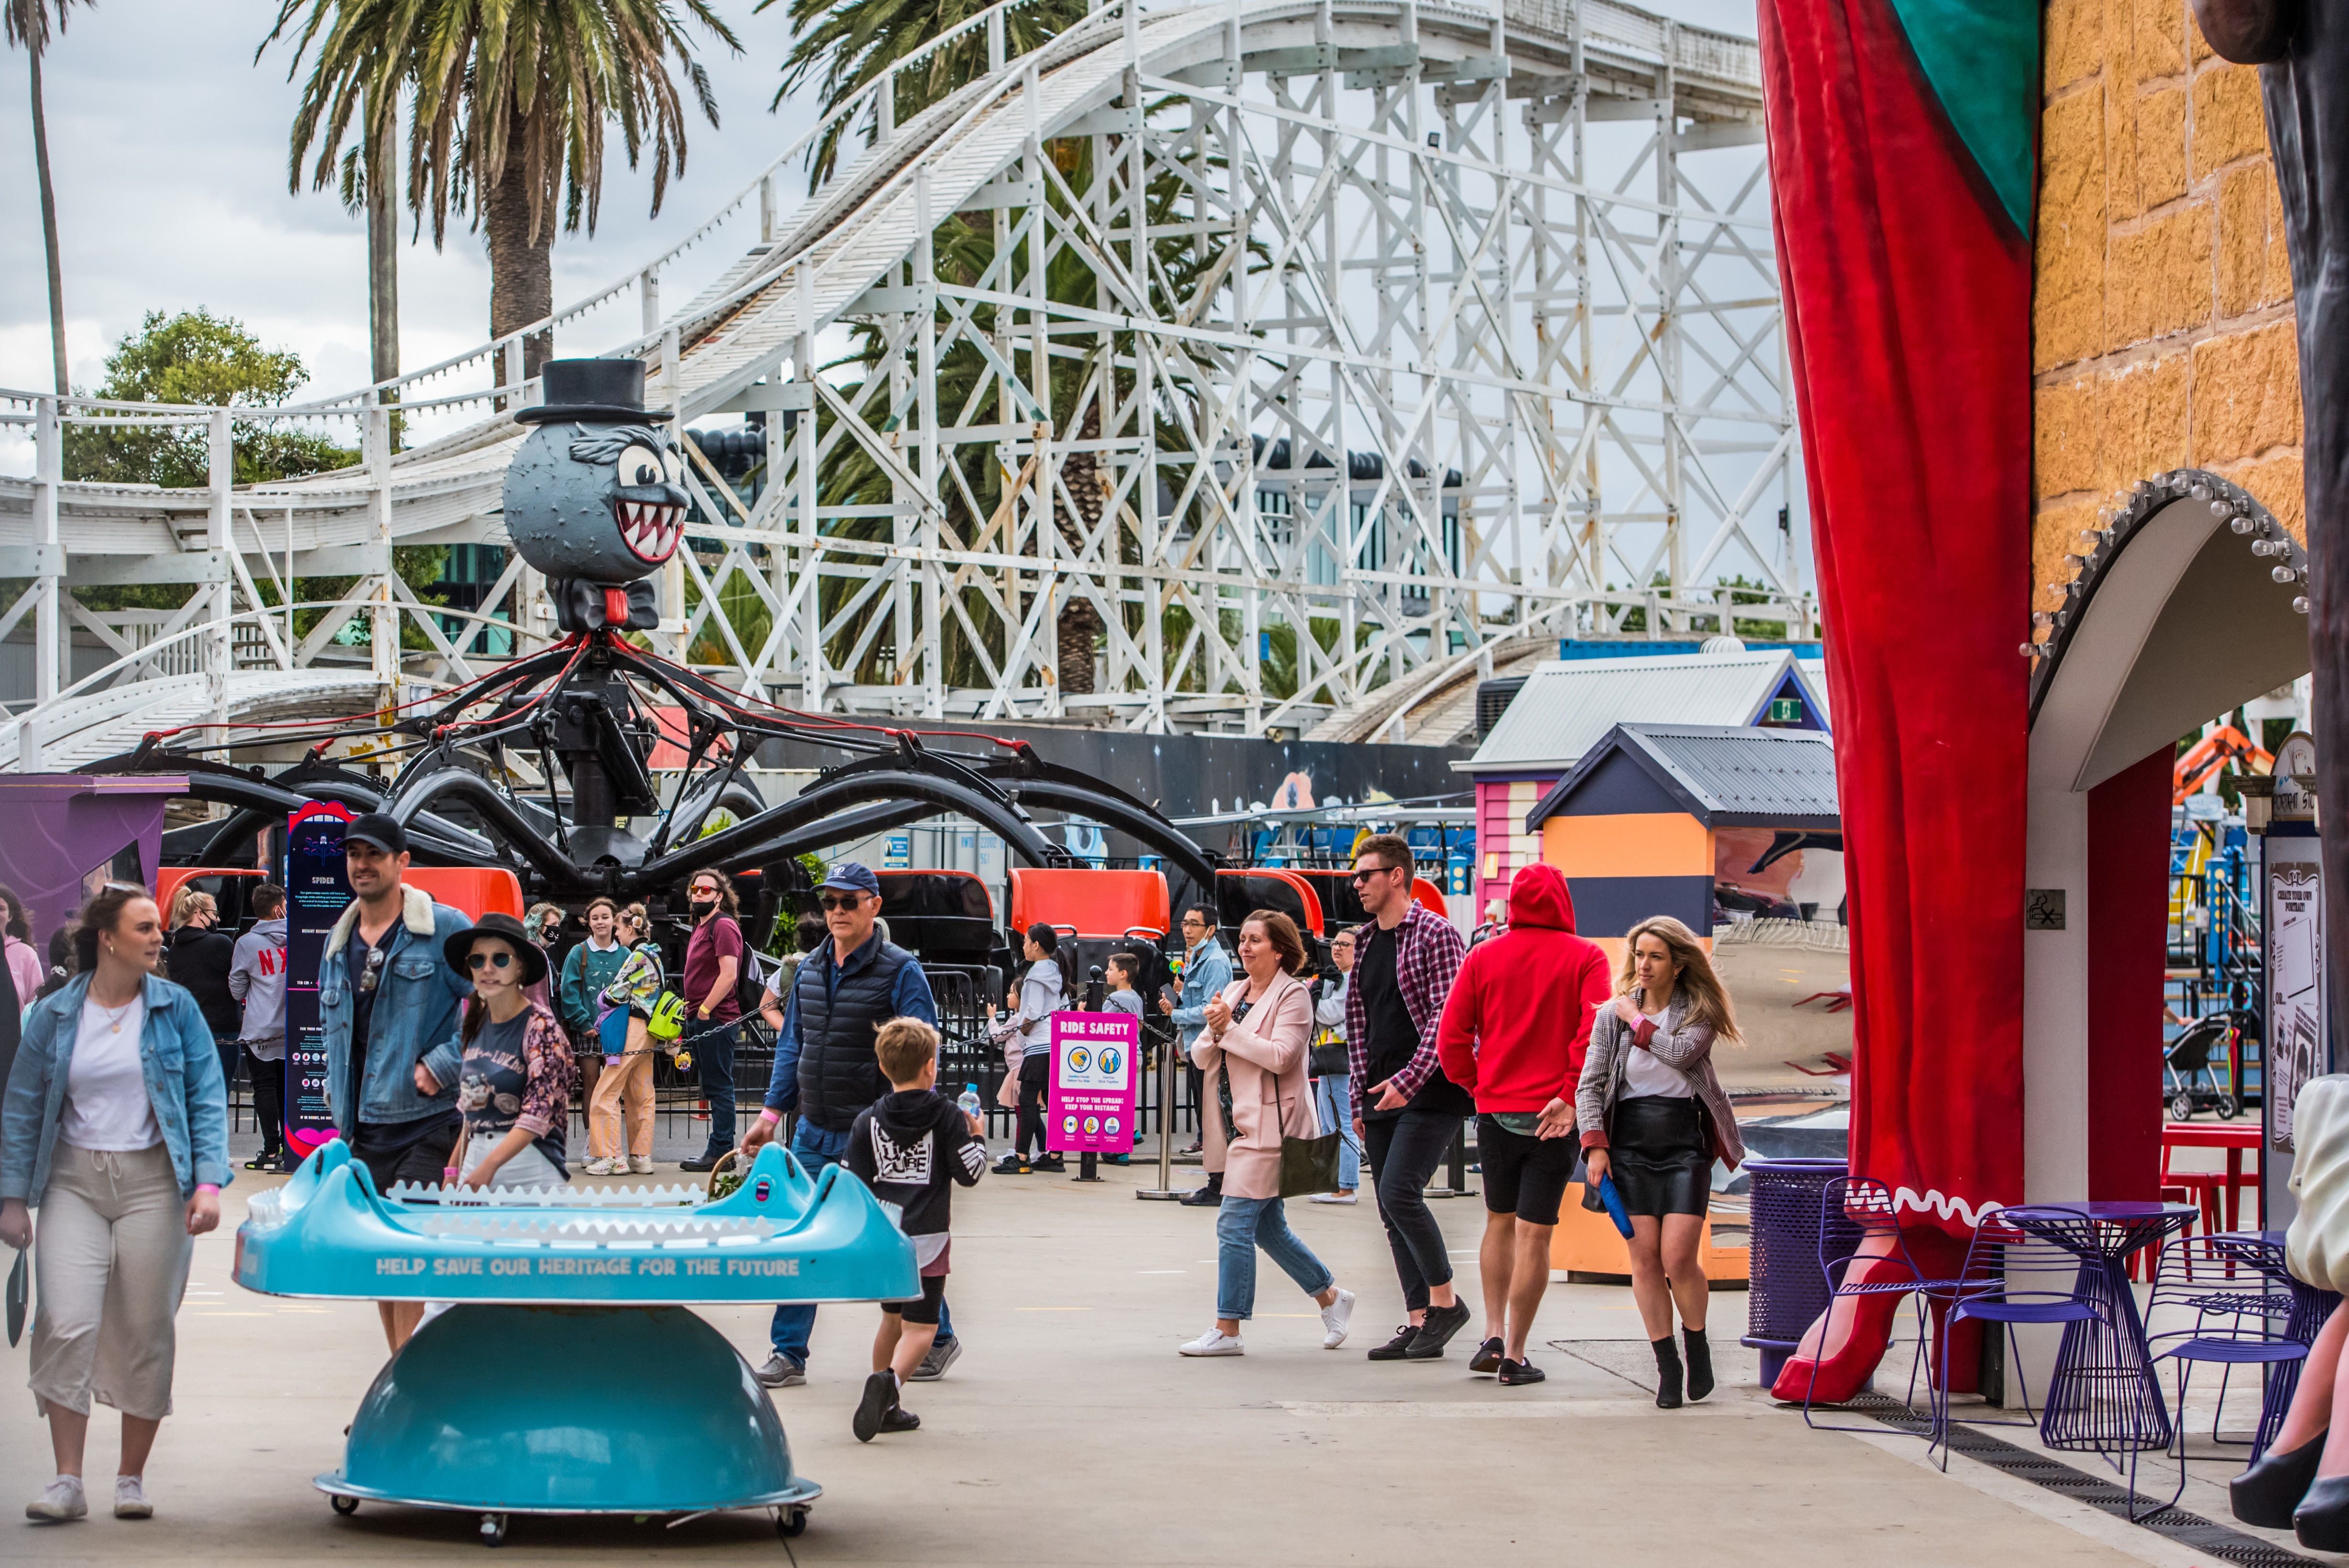 People seen walking around and lining up for rides without wearing masks at Luna Park in Melbourne.